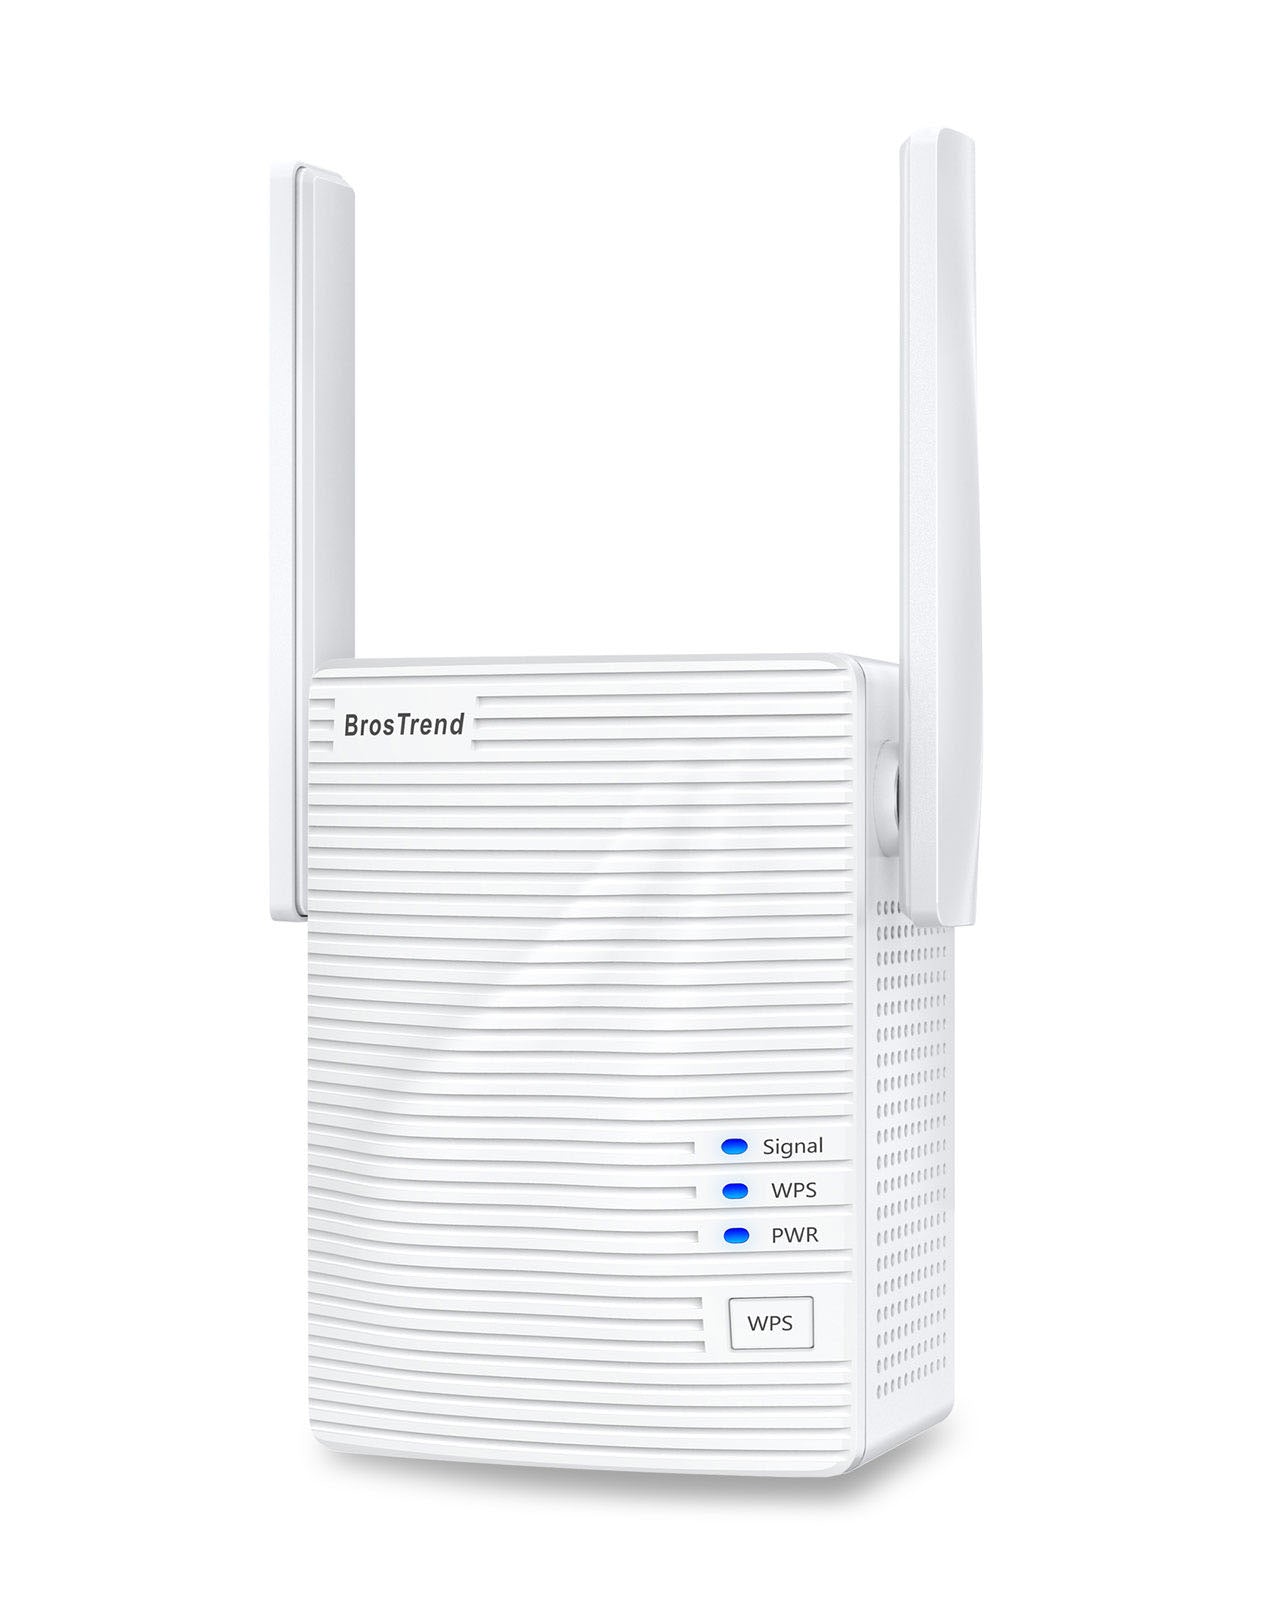 BrosTrend 1200Mbps WiFi Booster Dual Band WiFi Range Extender Supports 5GHz and 2.4GHz Wireless Band